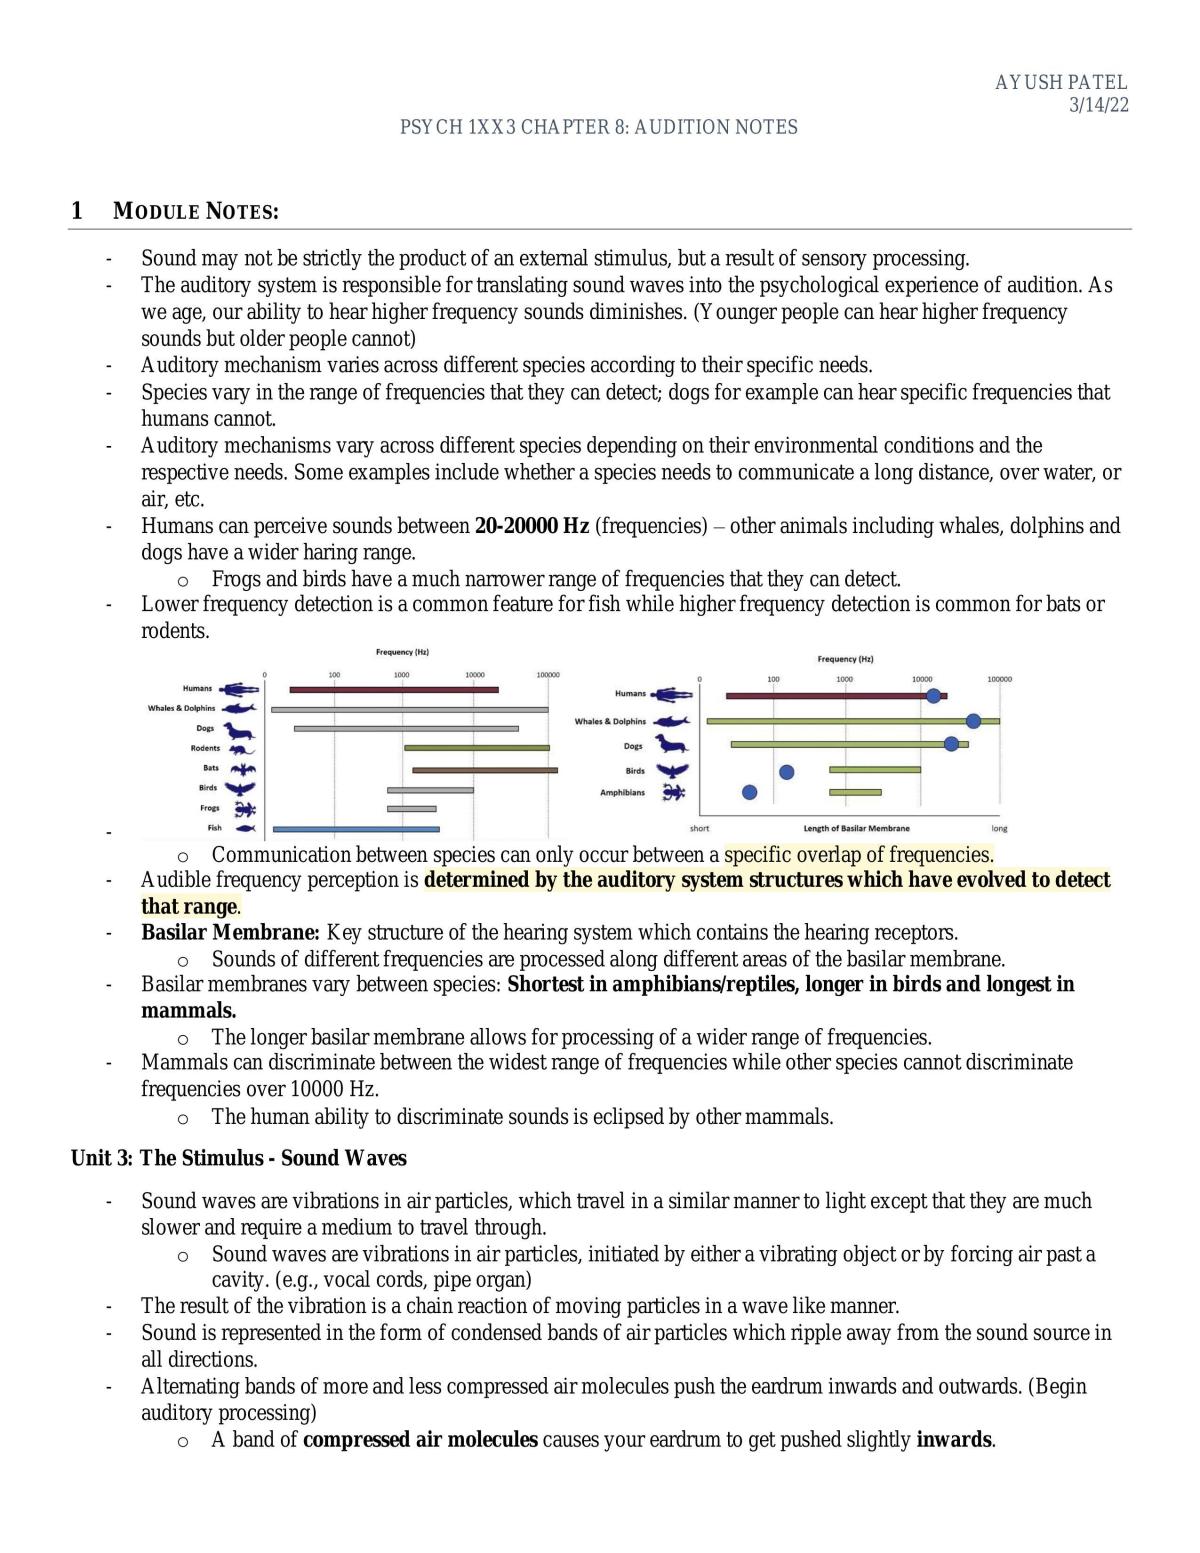 Psych 1xx3 notes - Page 111